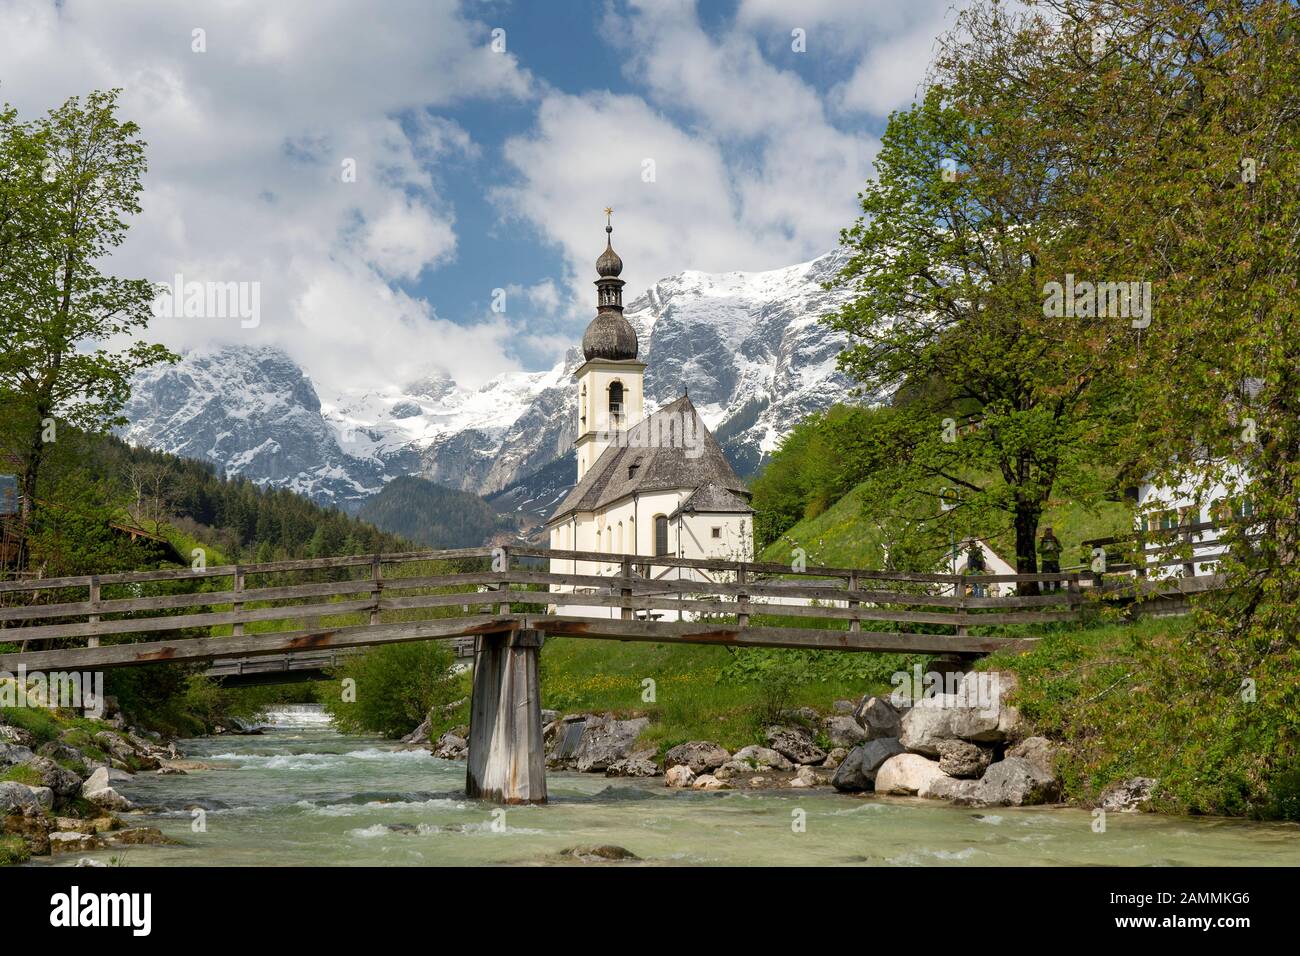 the church of Ramsau - dedicated to St. Sebastian - in front of the mighty, still snow-covered massif of Reiter Alpe [automated translation] Stock Photo